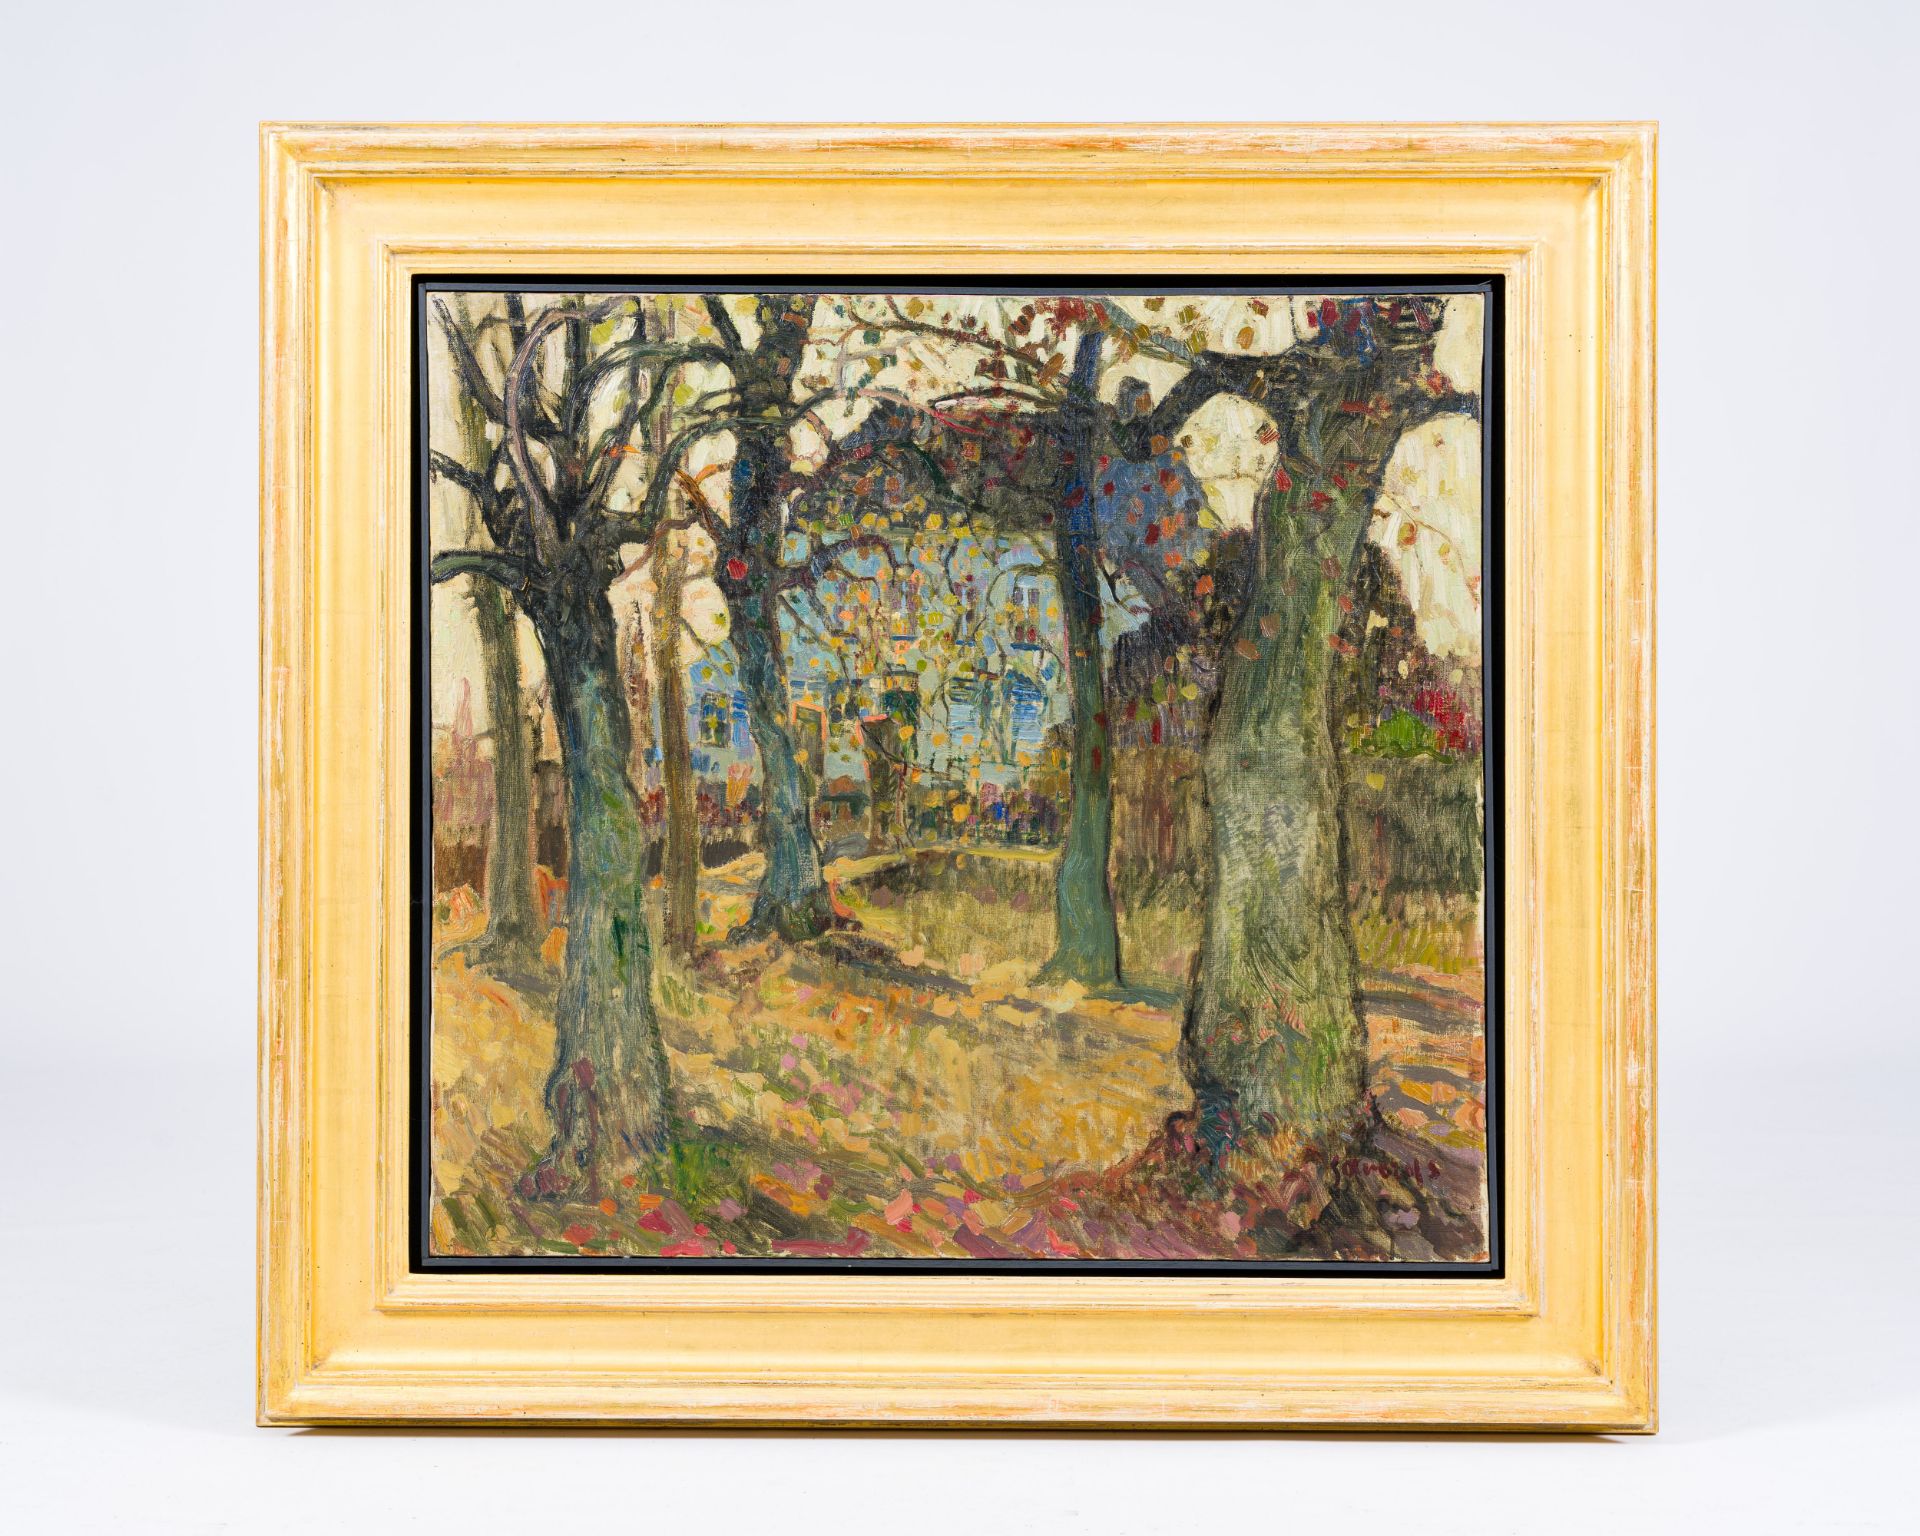 Albert Saverys (1886-1964): Presbytery in Bachte-Maria-Leerne, oil on canvas - Image 2 of 5